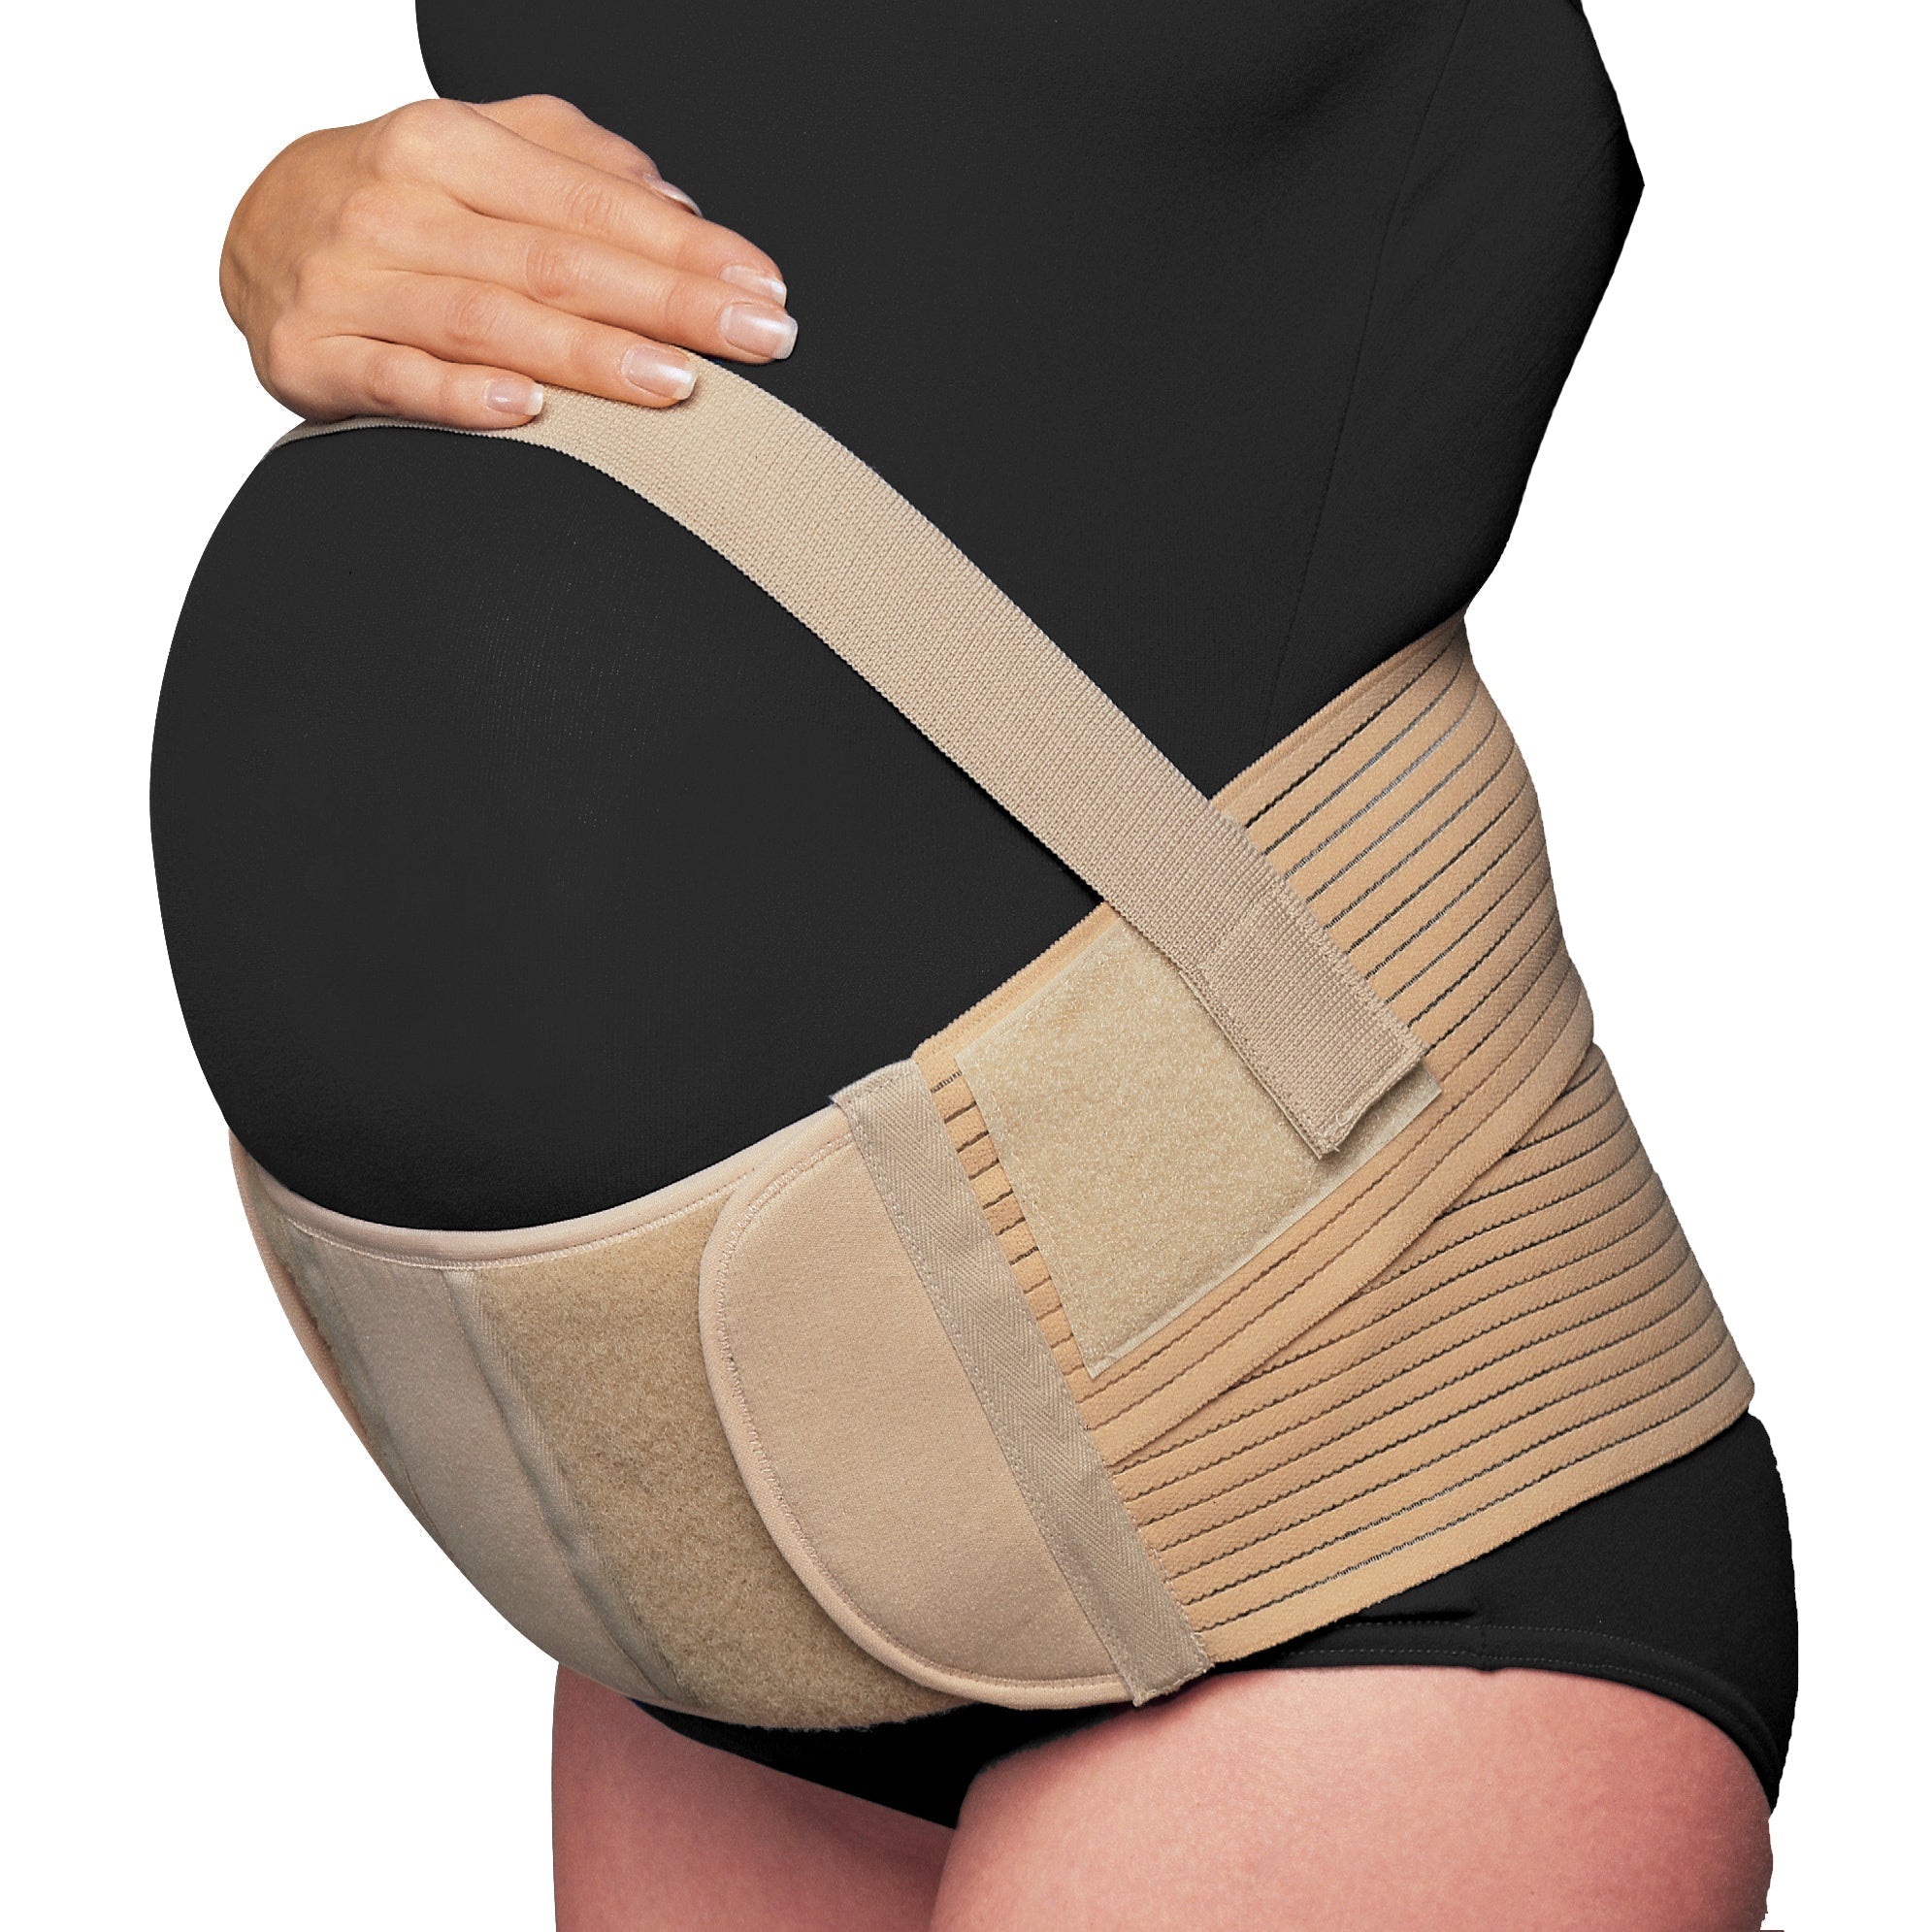 OTC Maternity Support-2786 - Midwest DME Supply